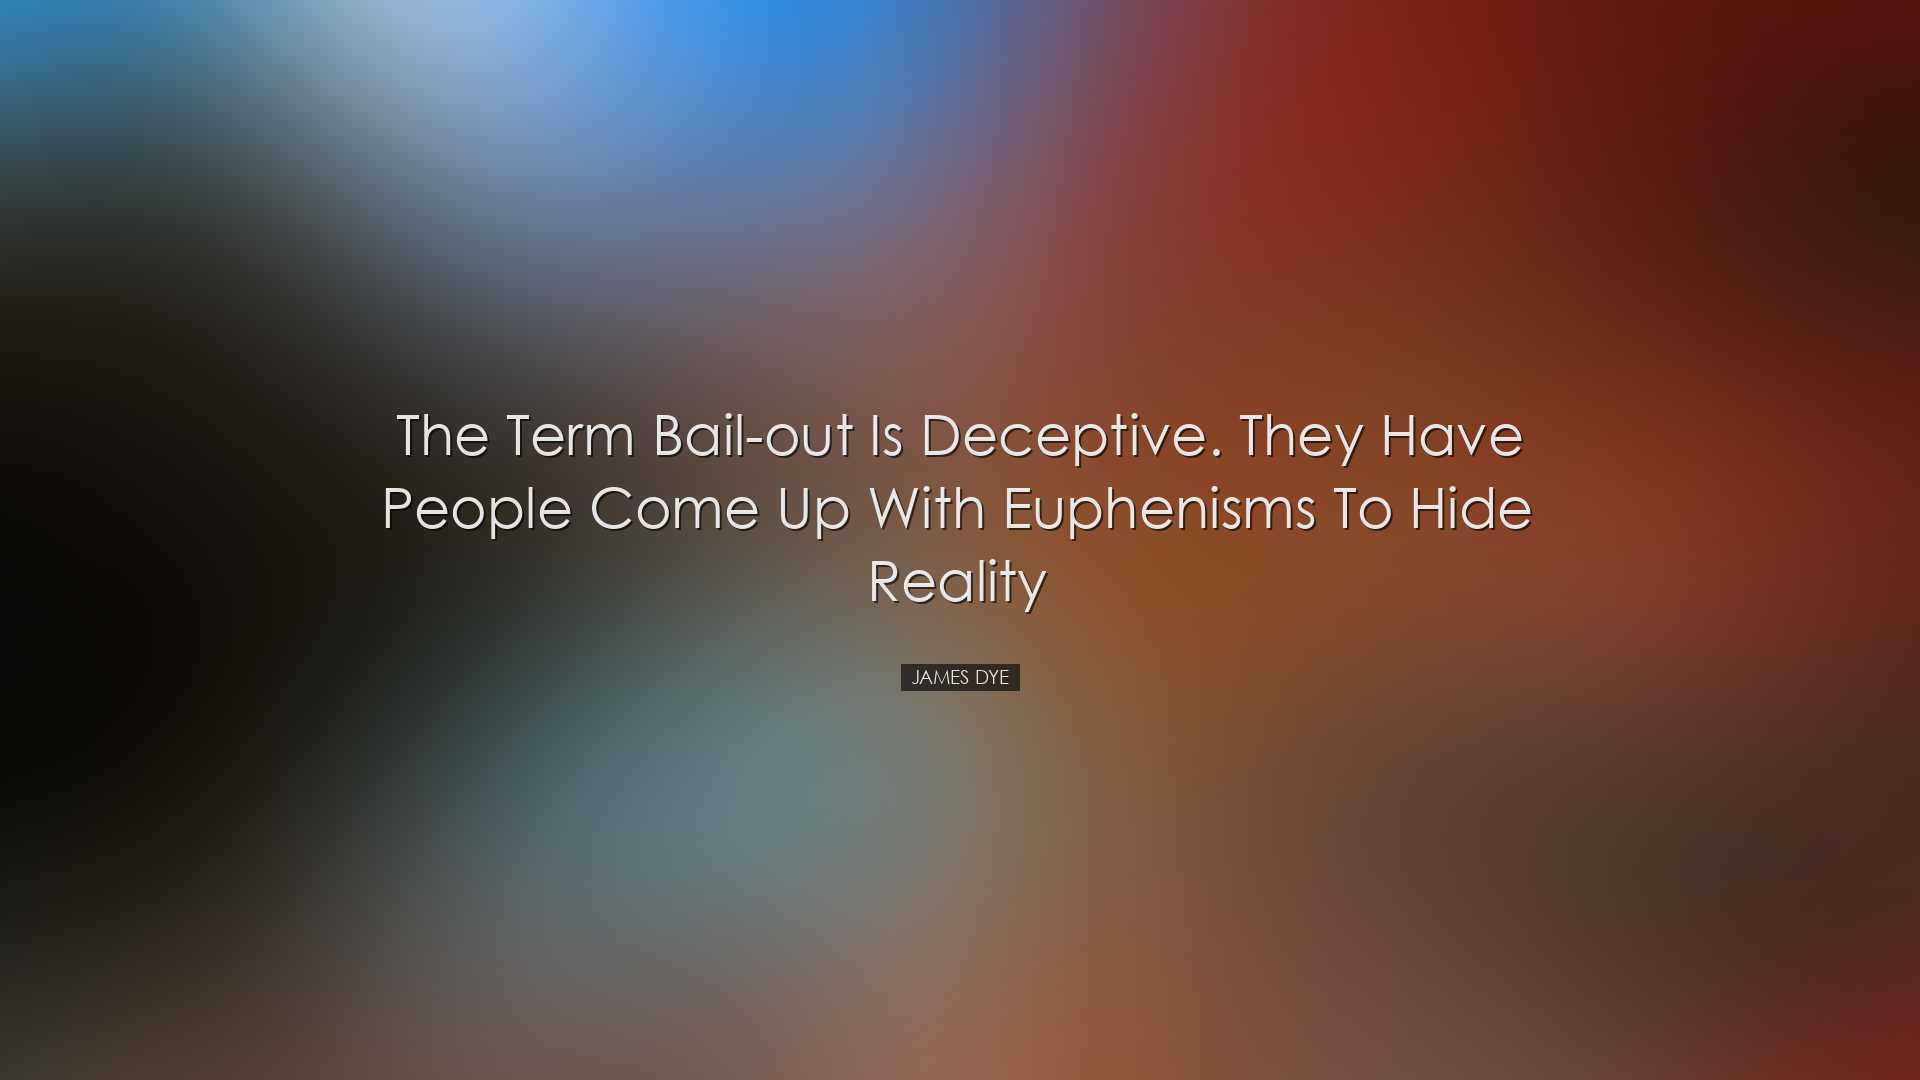 The term bail-out is deceptive. They have people come up with euph